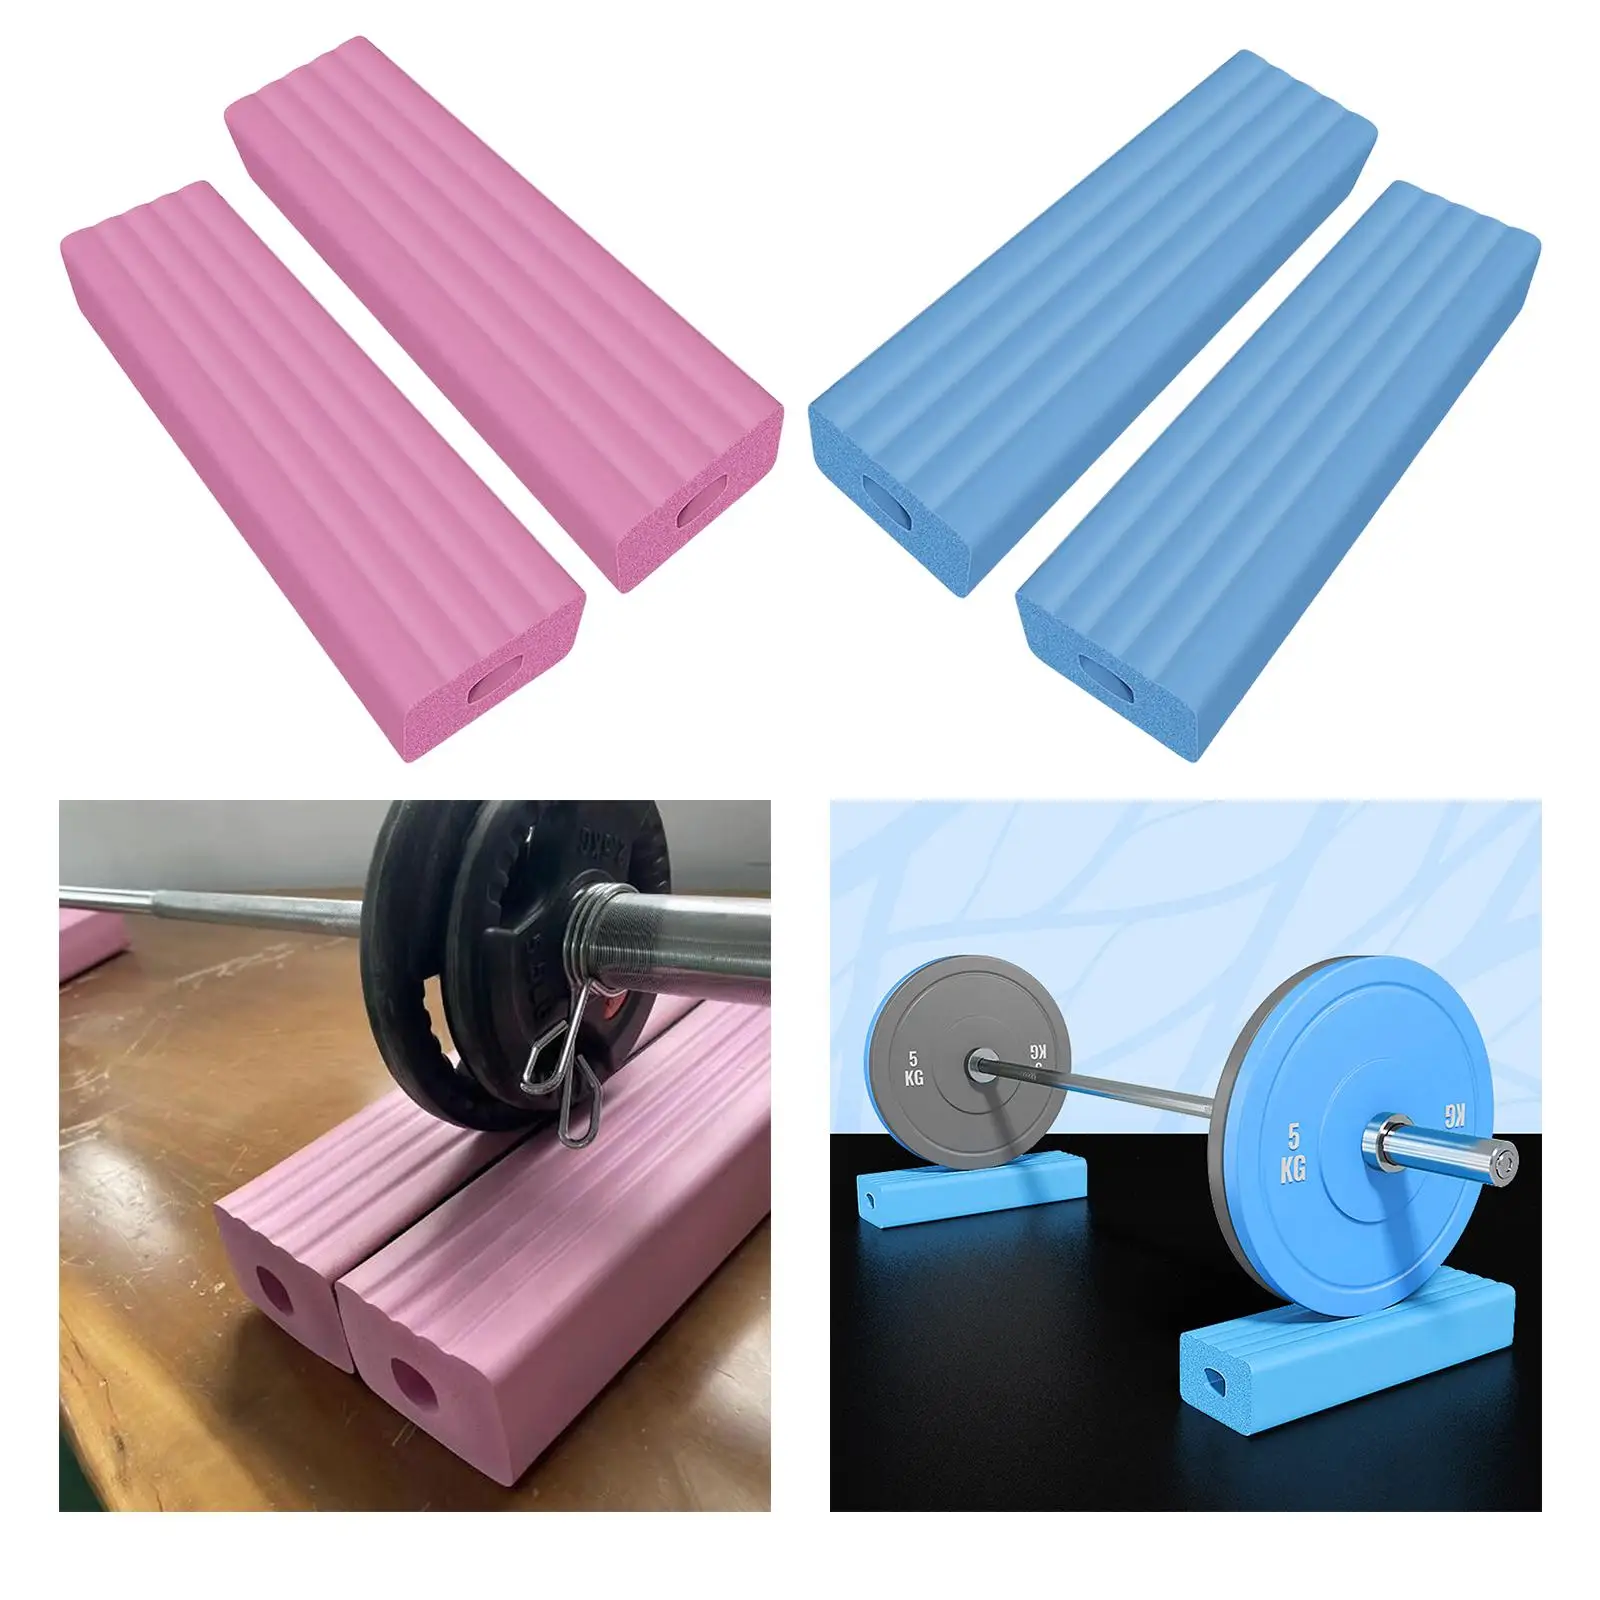 Foam Rubber Weightlifting Barbell Shock Absorber Cushion Convenient Premium Material Accessory Multiple Use Lightweight Compact